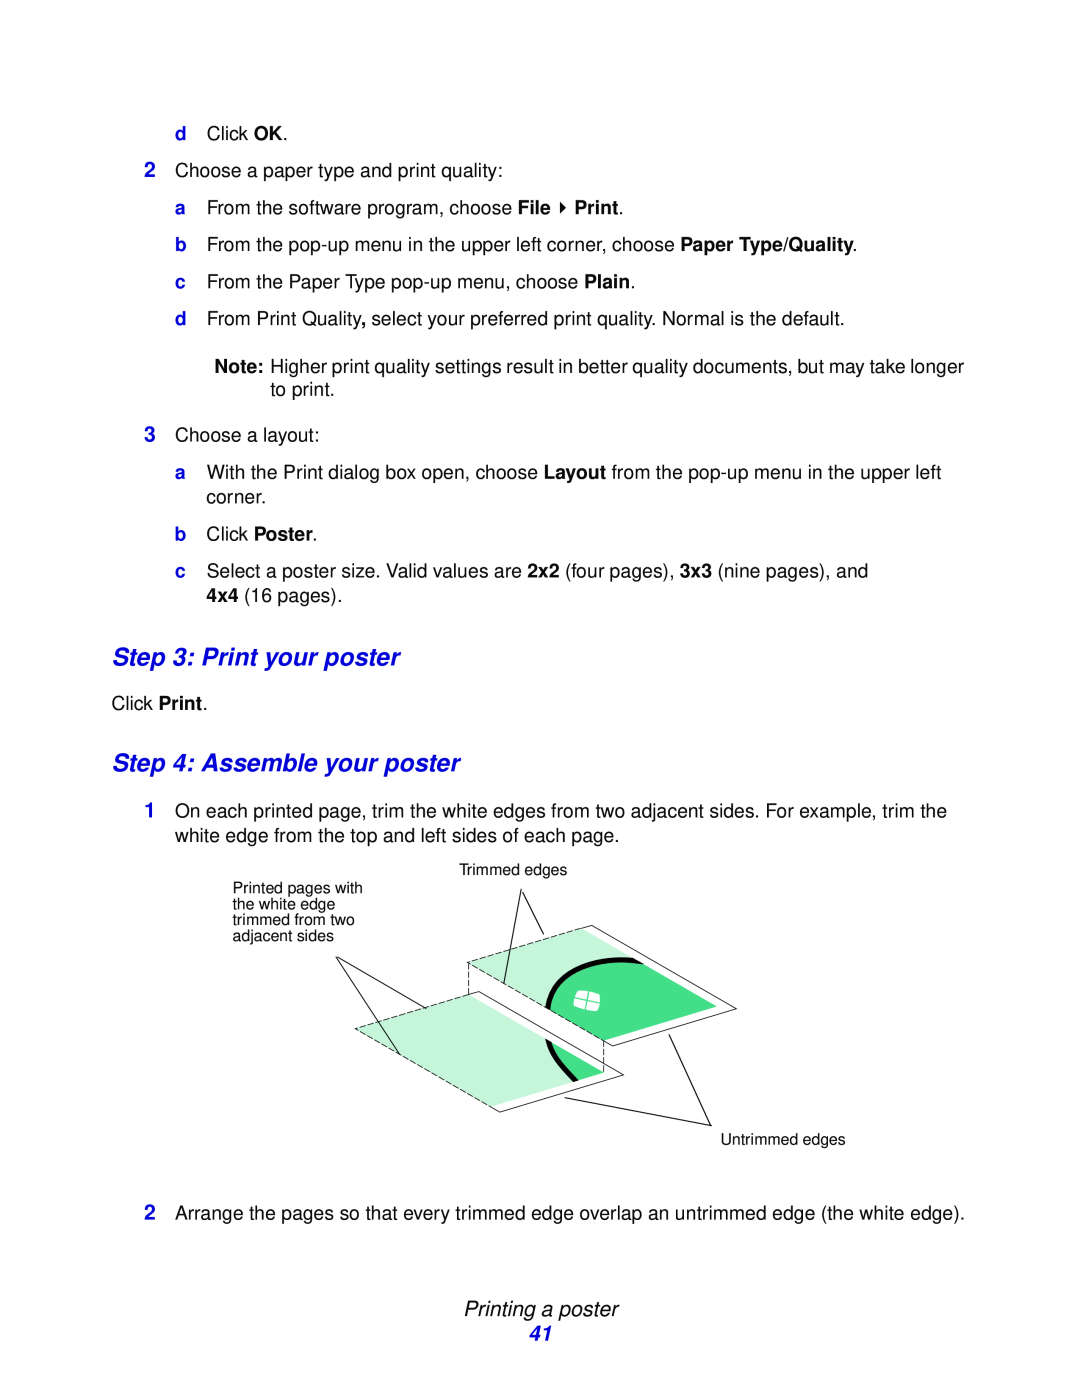 Lexmark Z600 Series manual Print your poster, Assemble your poster, Trimmed edges, Untrimmed edges 